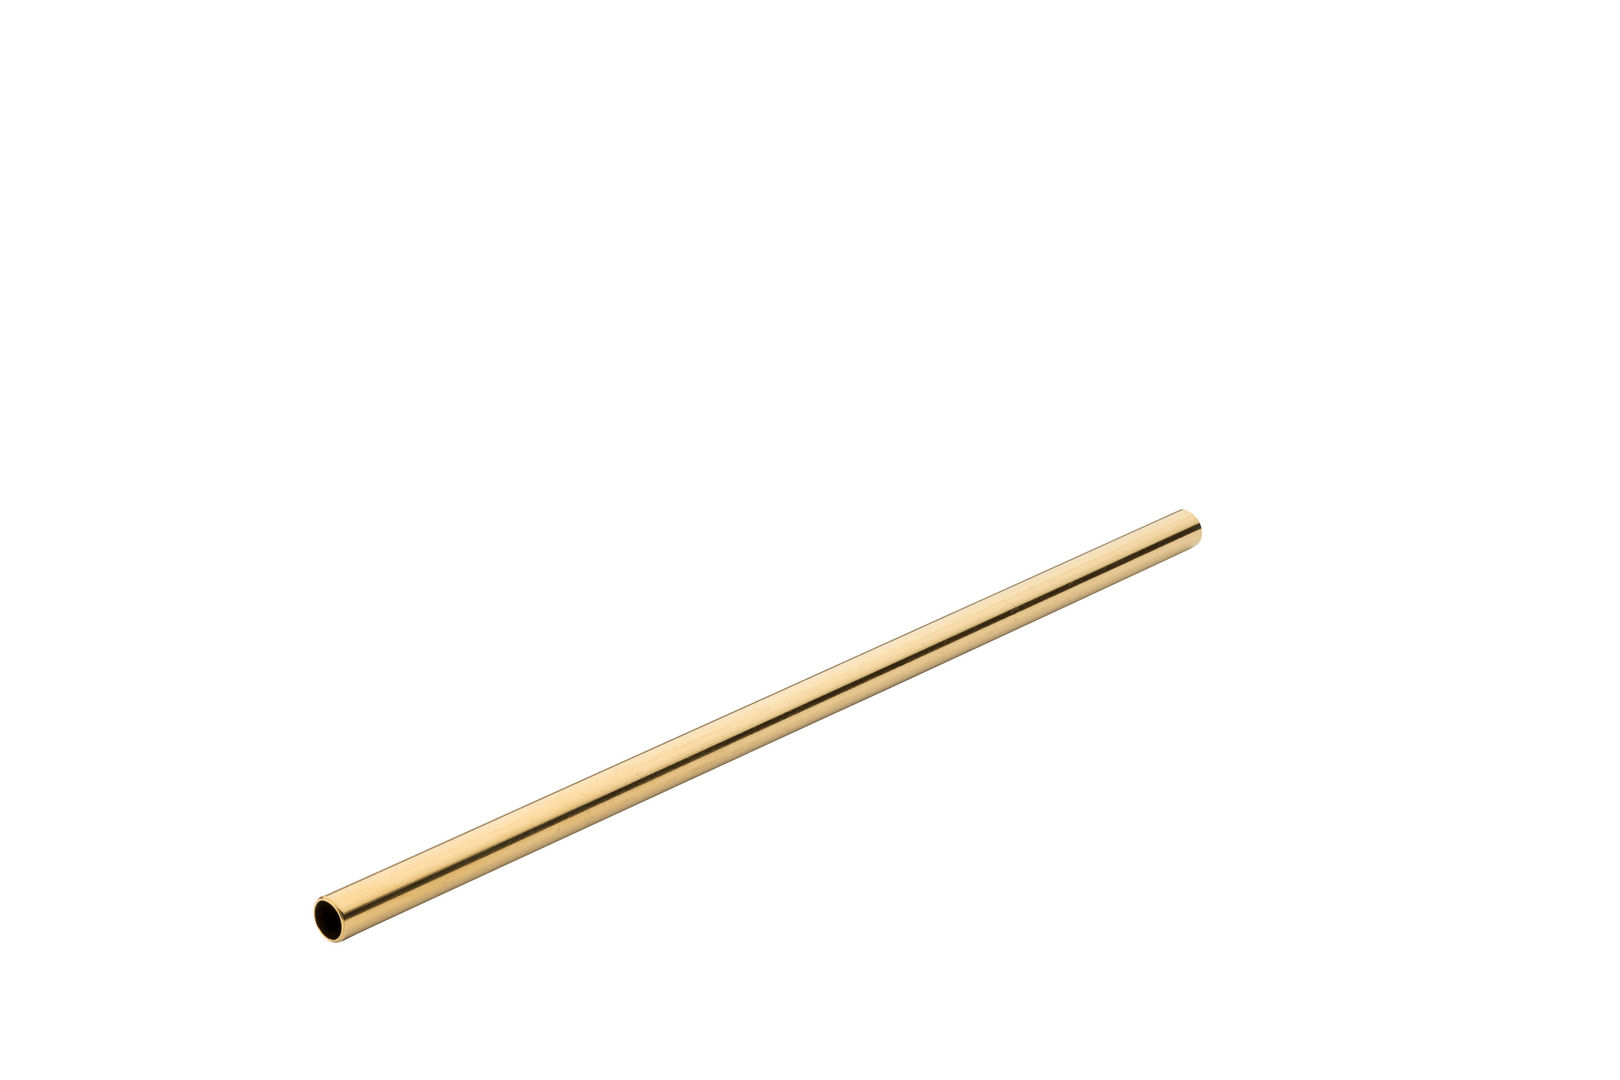 Stainless Steel Gold Cocktail Straw 5.5